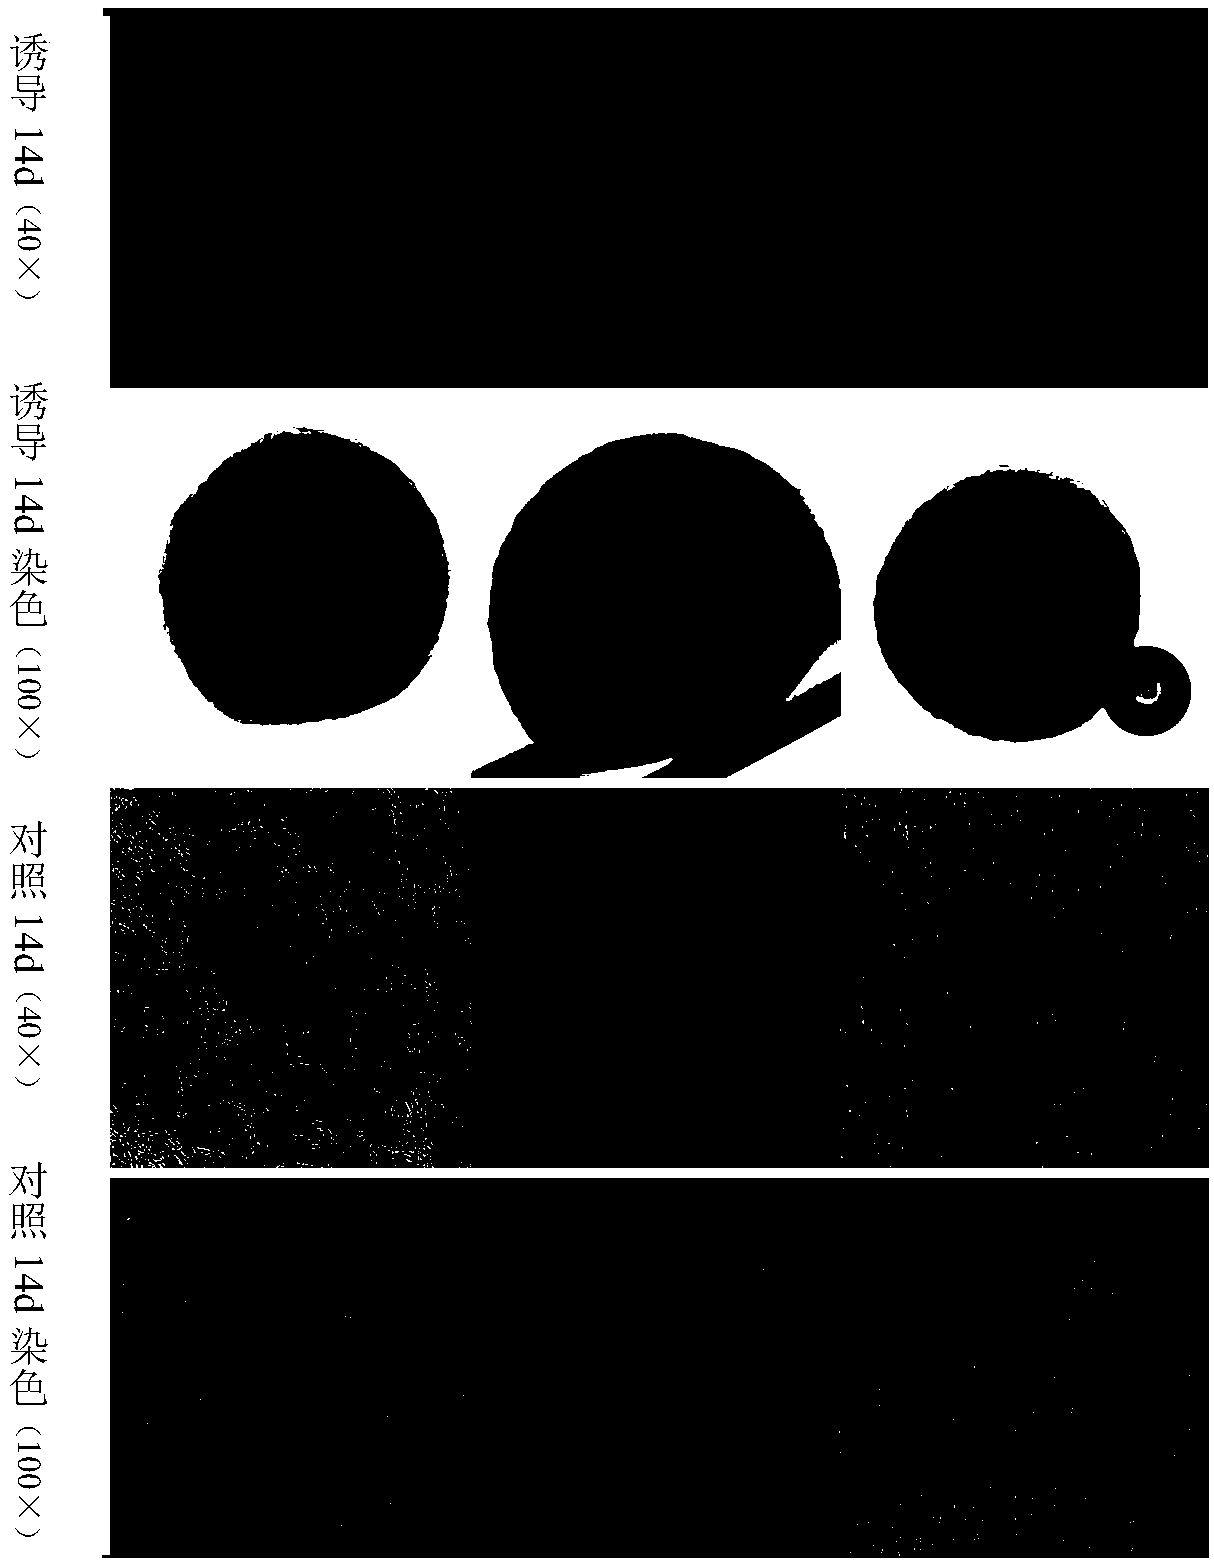 Preparation method of freeze-dried powder containing stem-cell active factors